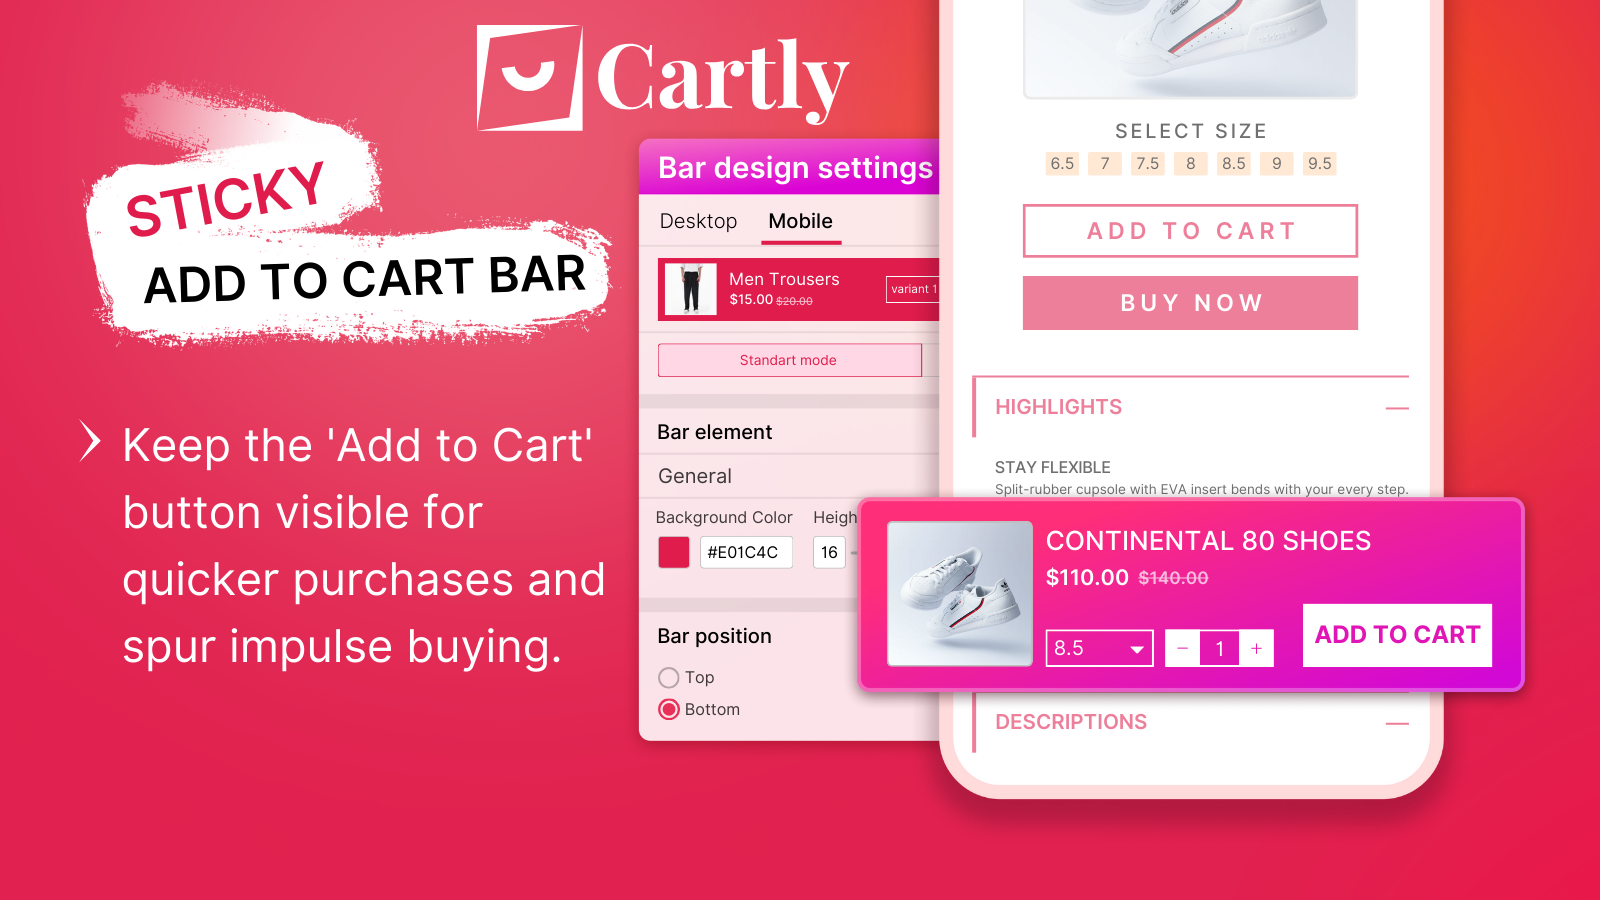 sticky add to cart button bar for quicker impulse purchases